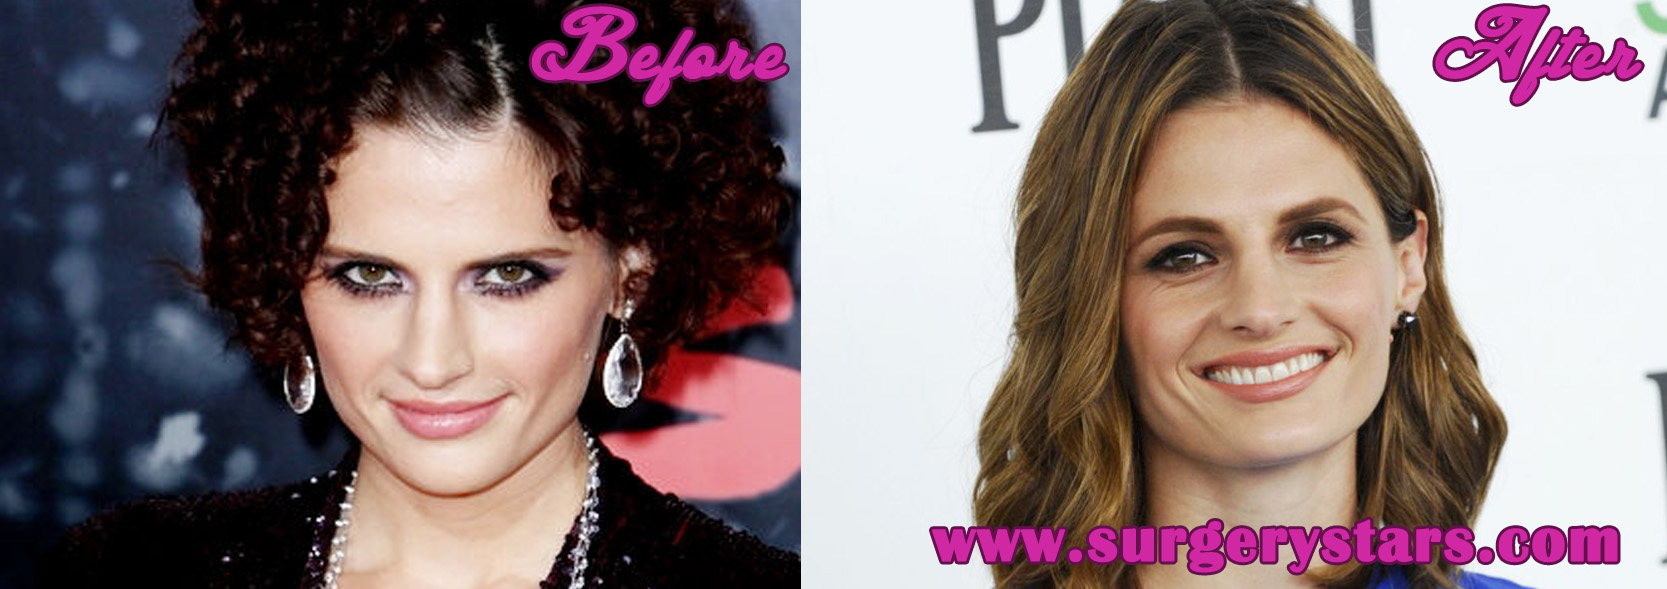 Stana Katic Plastic Surgery - Before and After Pictures.